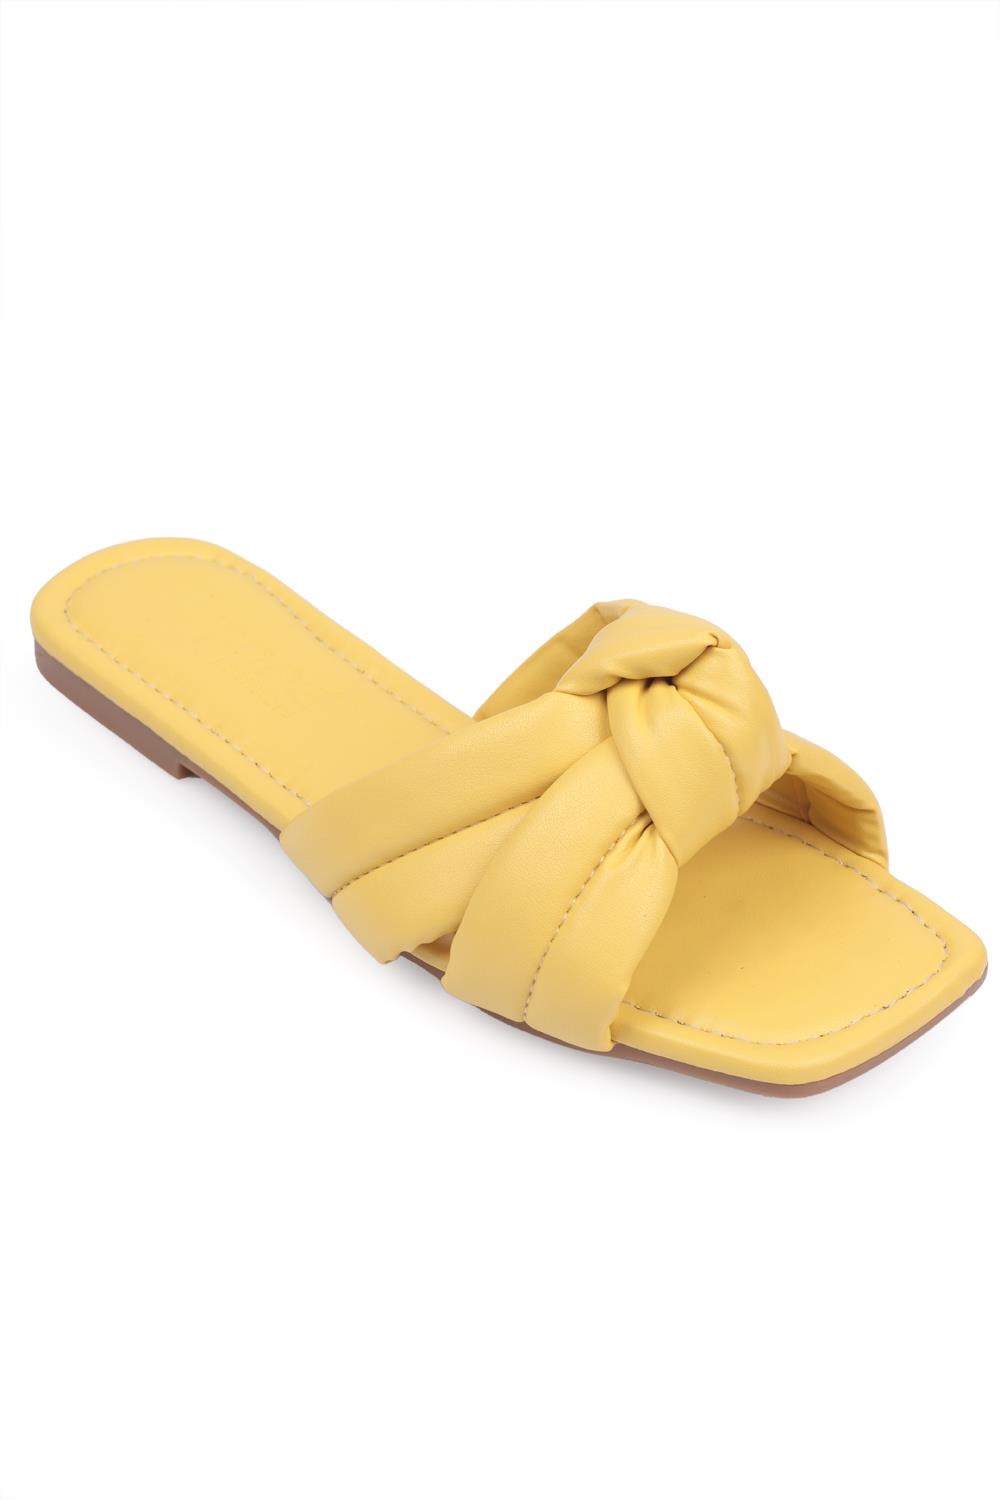 Capone Outfitters 075 Women Yellow Sandal | caponeoutfitters.com